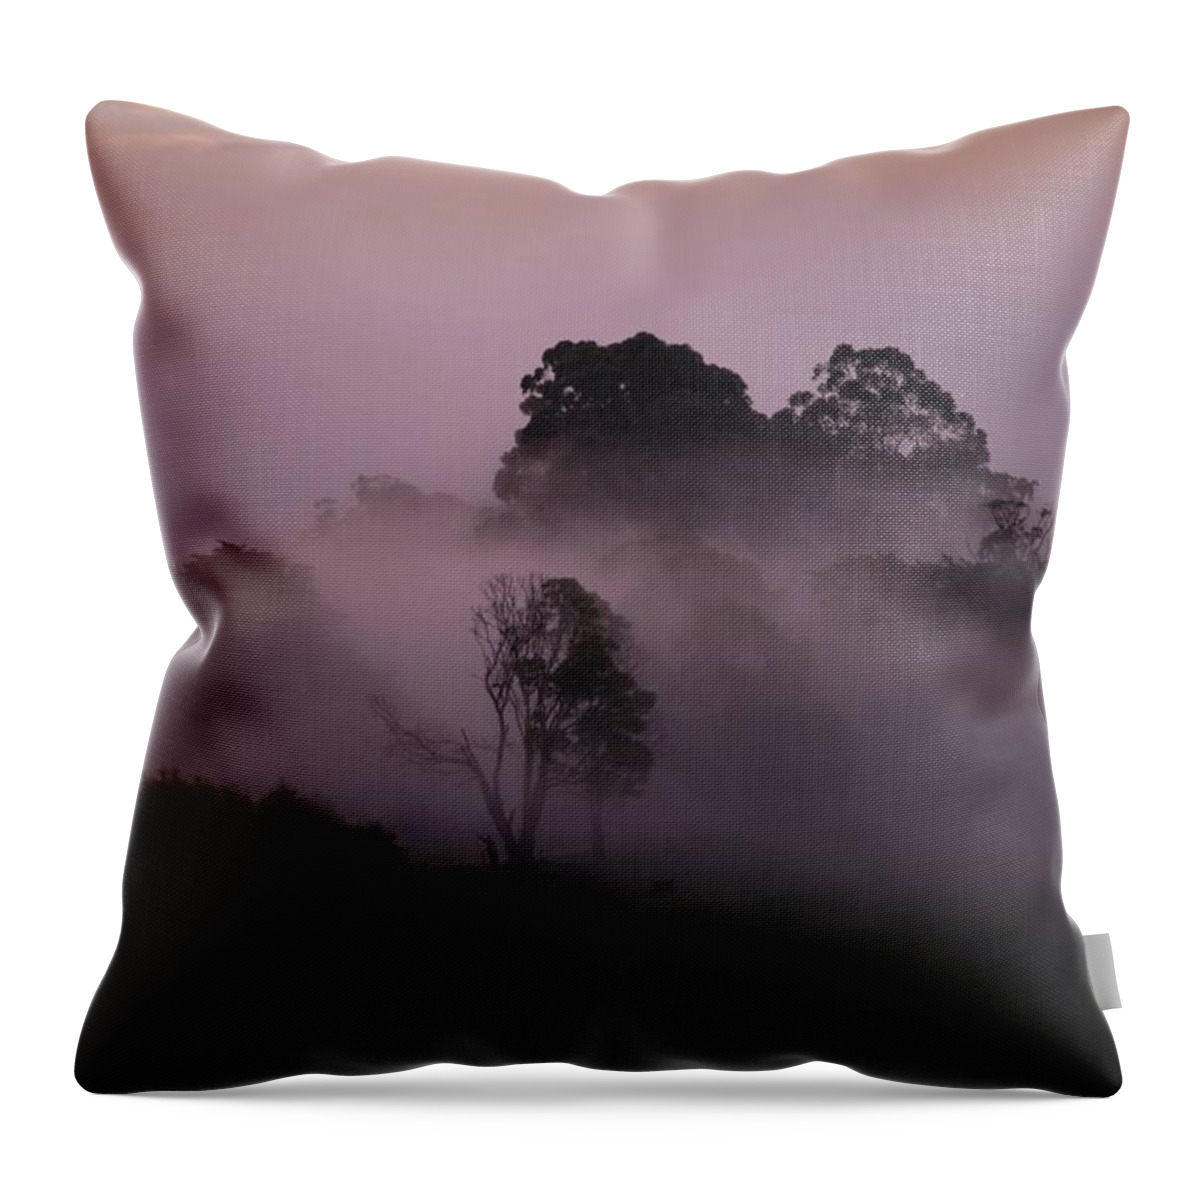 Landscapes Throw Pillow featuring the photograph Through The Mist by Lee Stickels